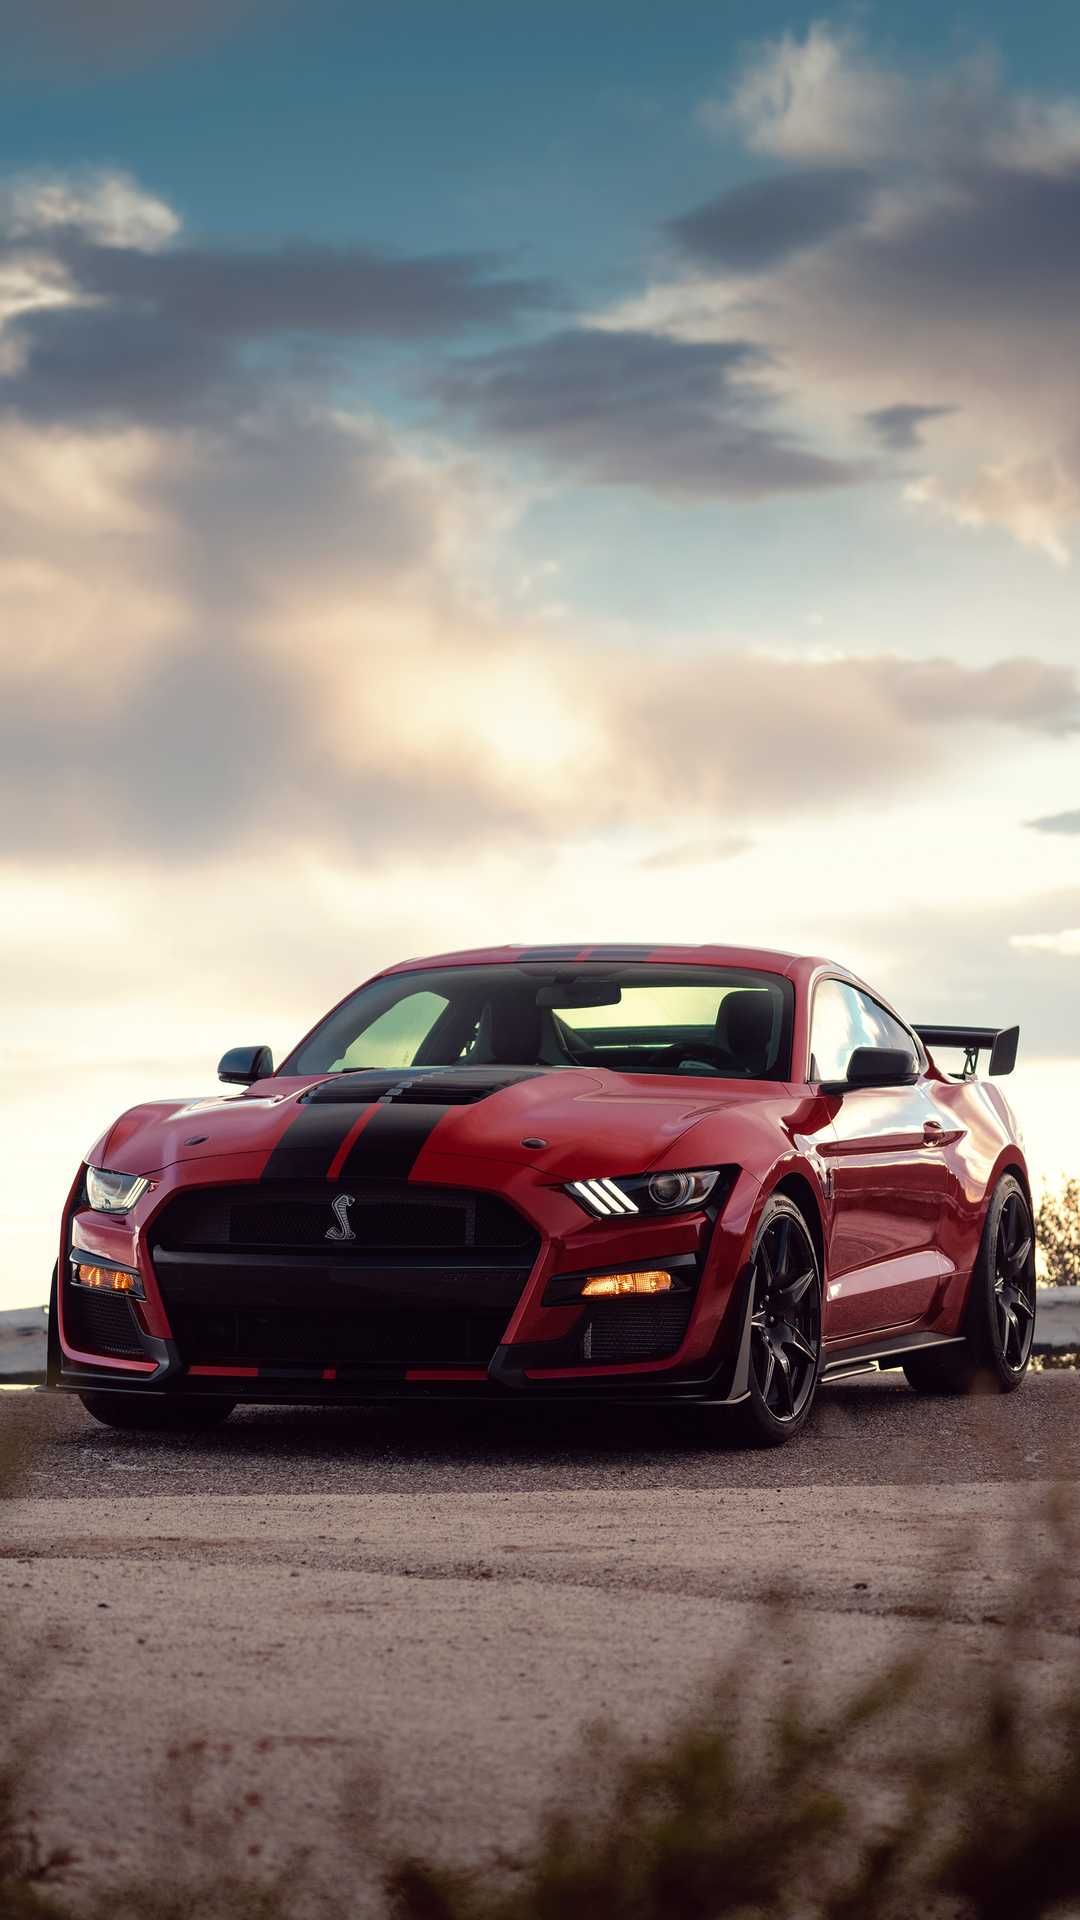 New, 2020 Ford Mustang Shelby GT500, red front angle